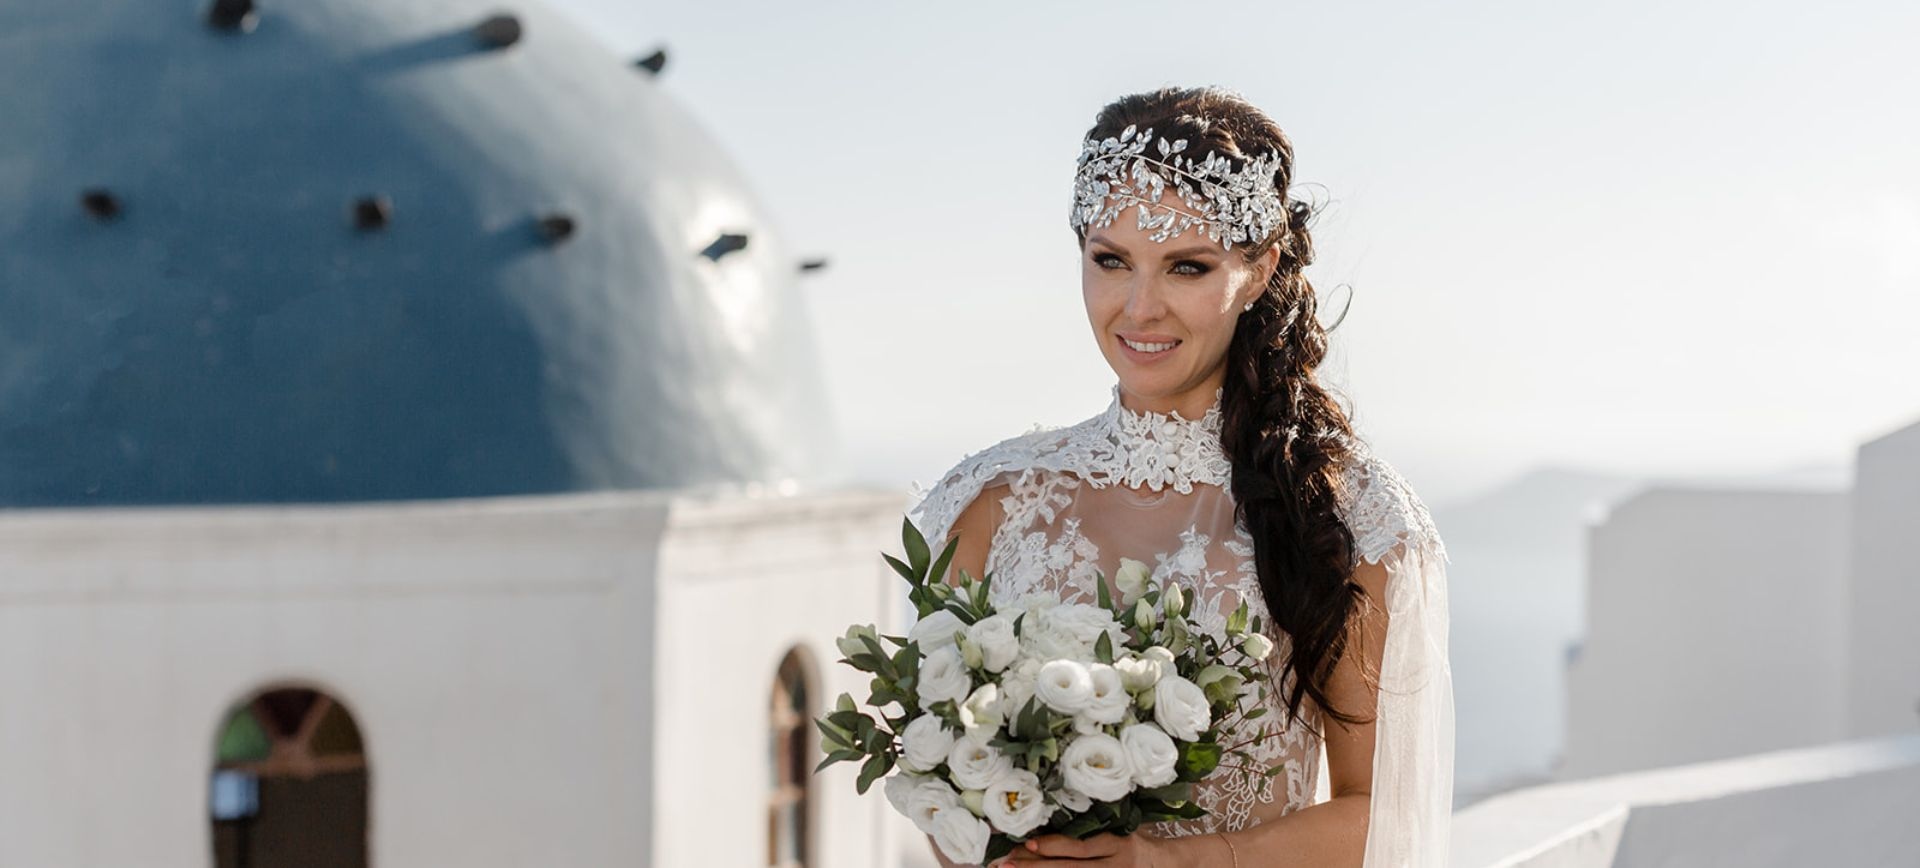 elope to santorini greece all inclusive wedding package with venue